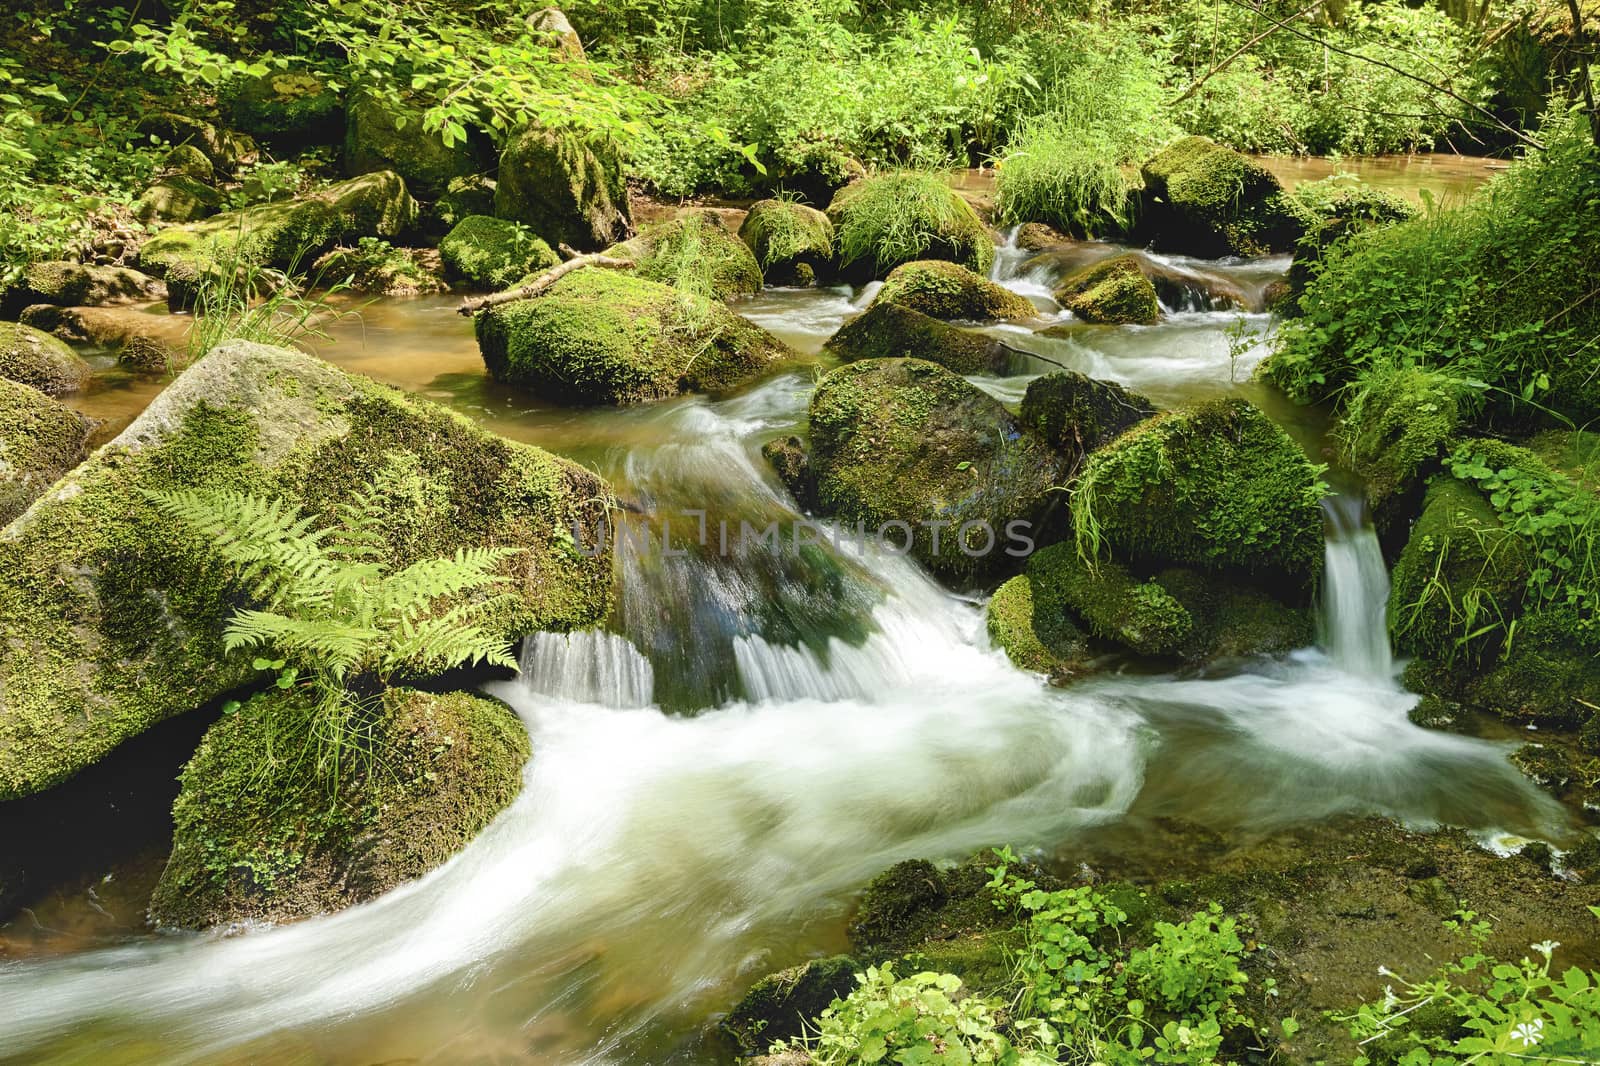 The river in the forest - HDR by hanusst